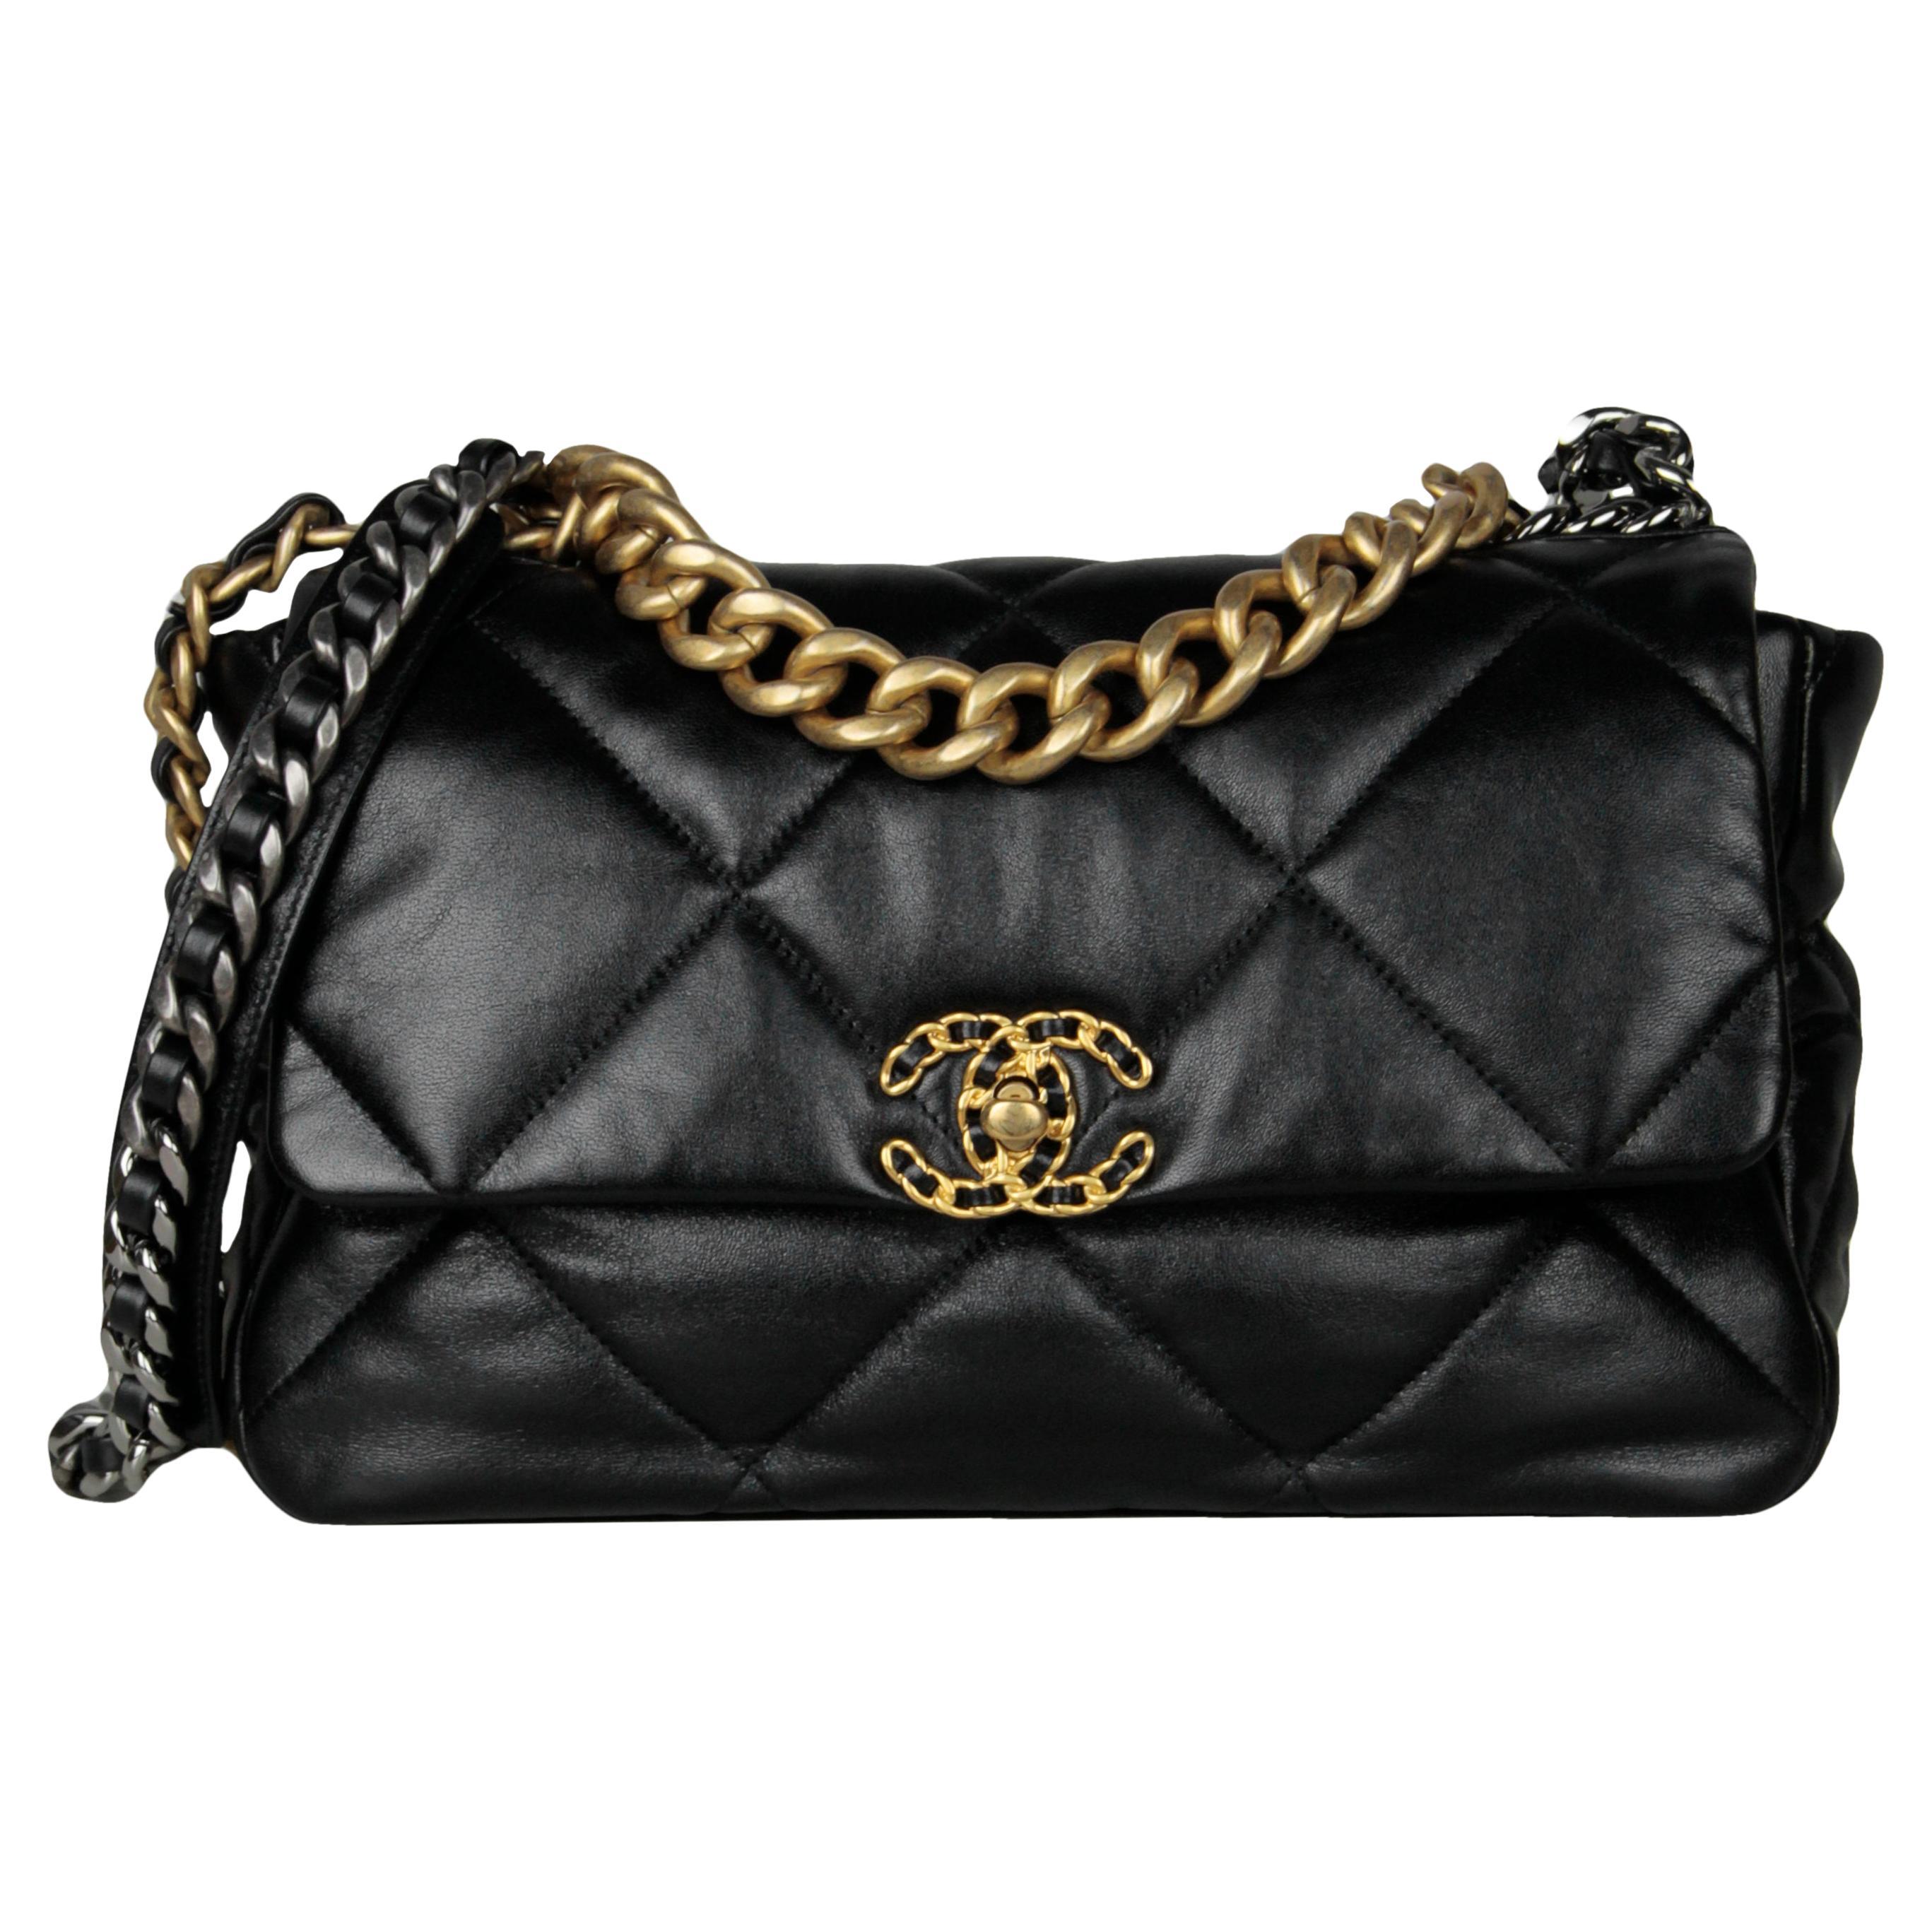 Chanel Black Lambskin Leather Quilted Large 19 Flap Bag For Sale